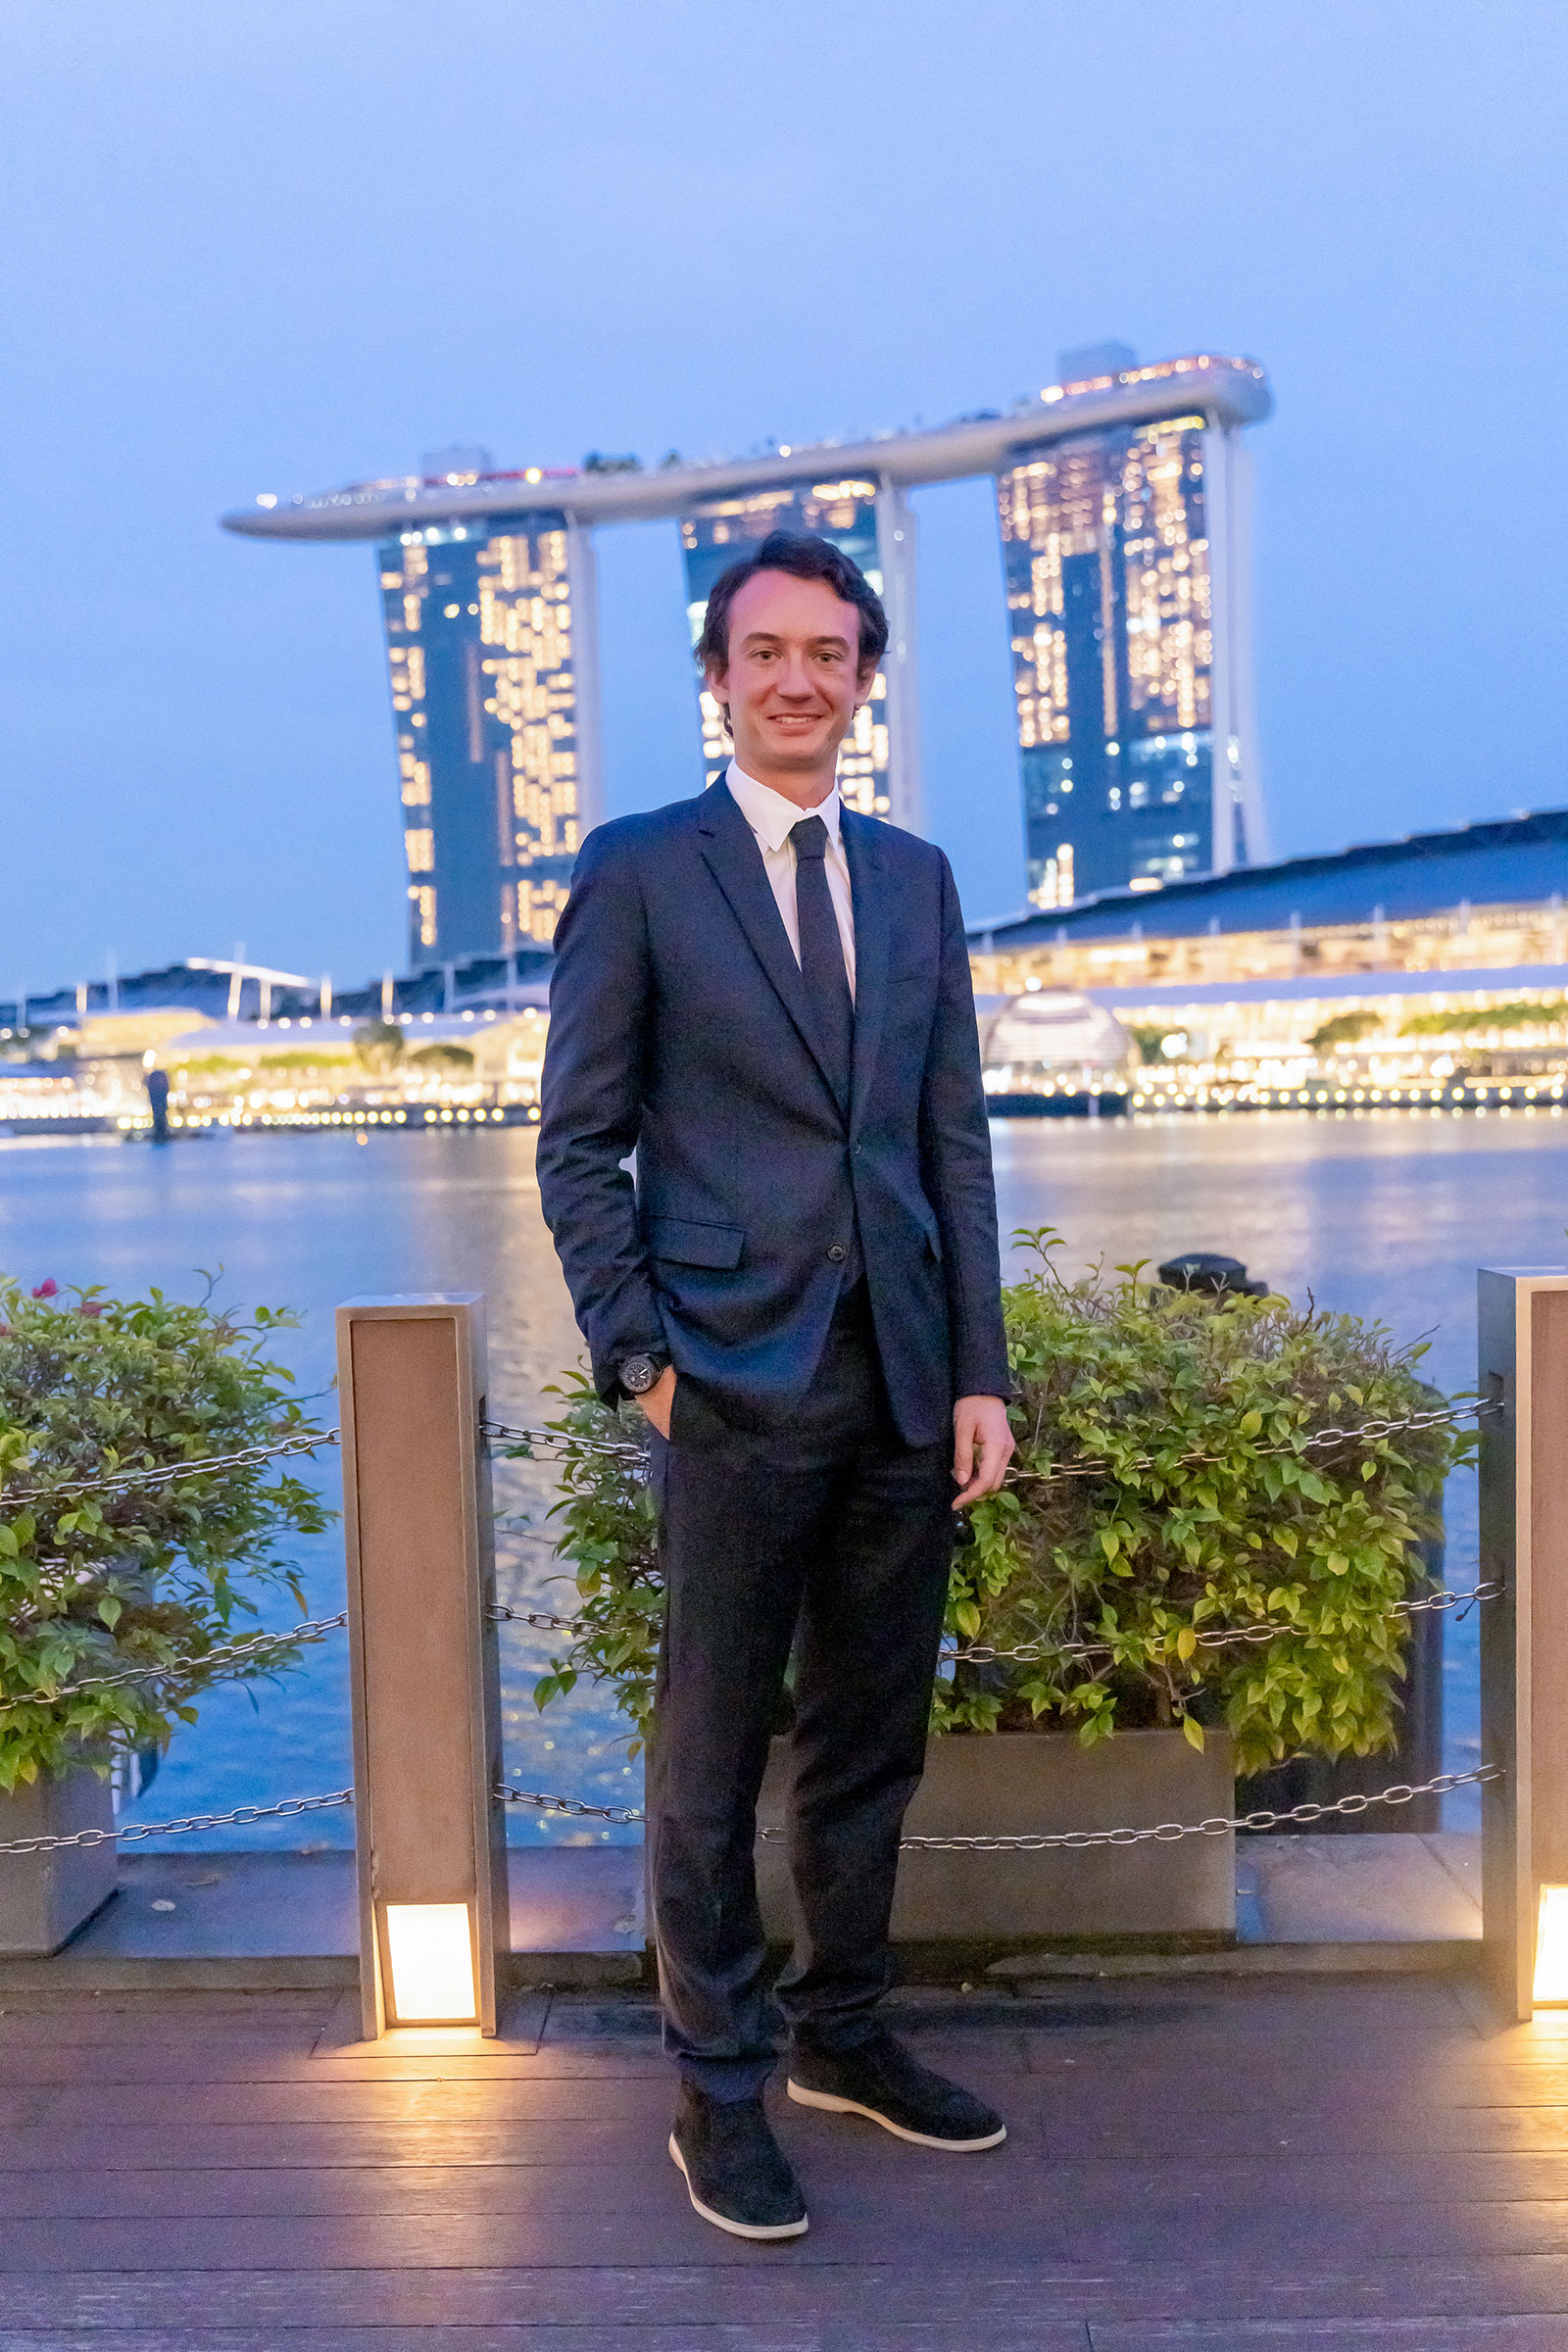 Meet Frédéric Arnault, the 26-year-old power player who was being groomed  to become TAG Heuer CEO - The Economic Times